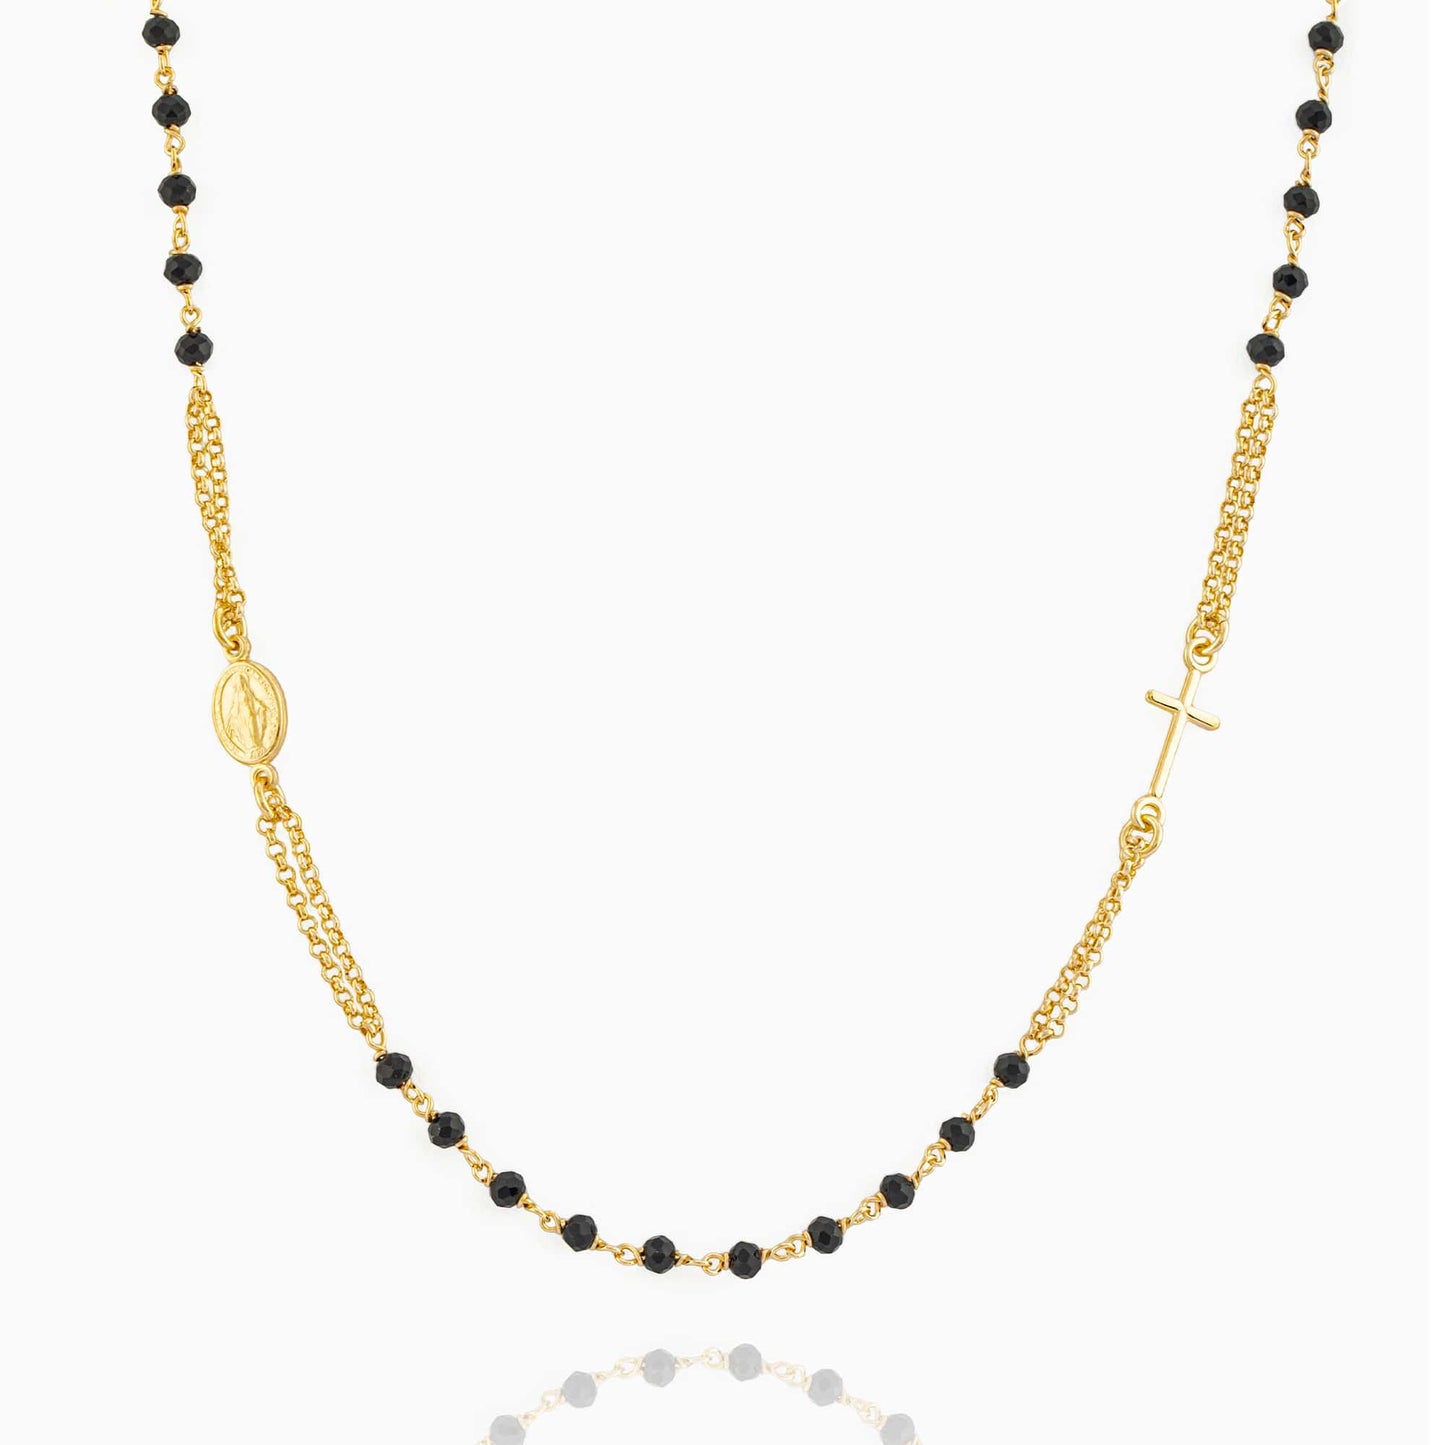 MONDO CATTOLICO Prayer Beads Gold / Cm 46+5 (18.1 in+2) STERLING SILVER NECKLACE ROSARY BLACK BEADS